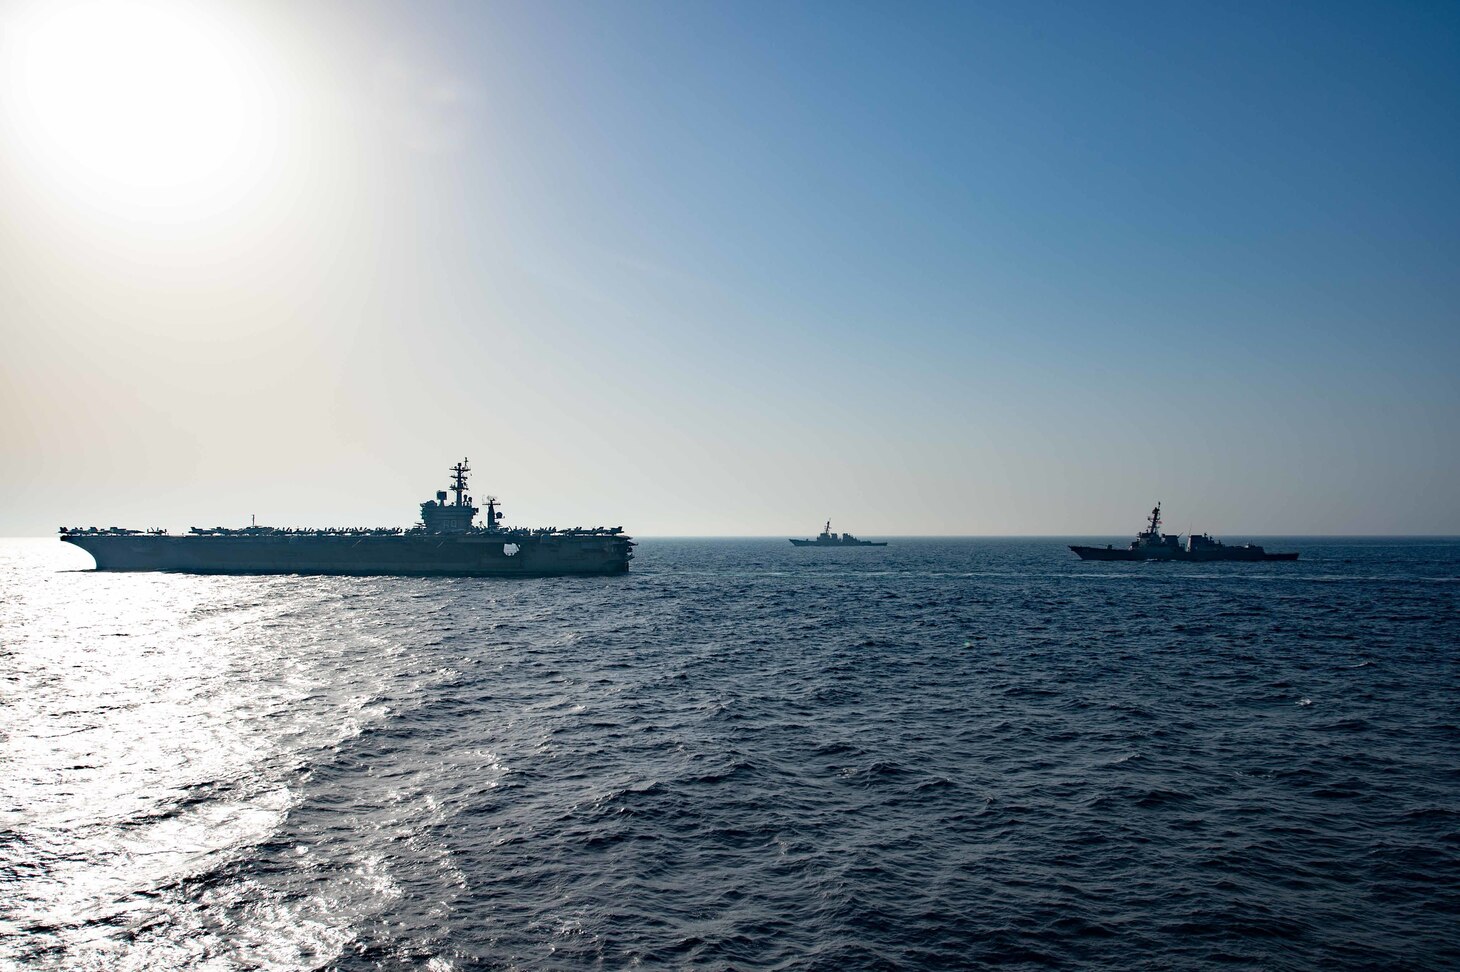 The aircraft carrier USS Dwight D. Eisenhower (CVN 69), left, the guided-missile destroyer USS Laboon (DDG 58), center, and the guided-missile destroyer USS Thomas Hudner (DDG 116) operate in formation in the Arabian Sea.